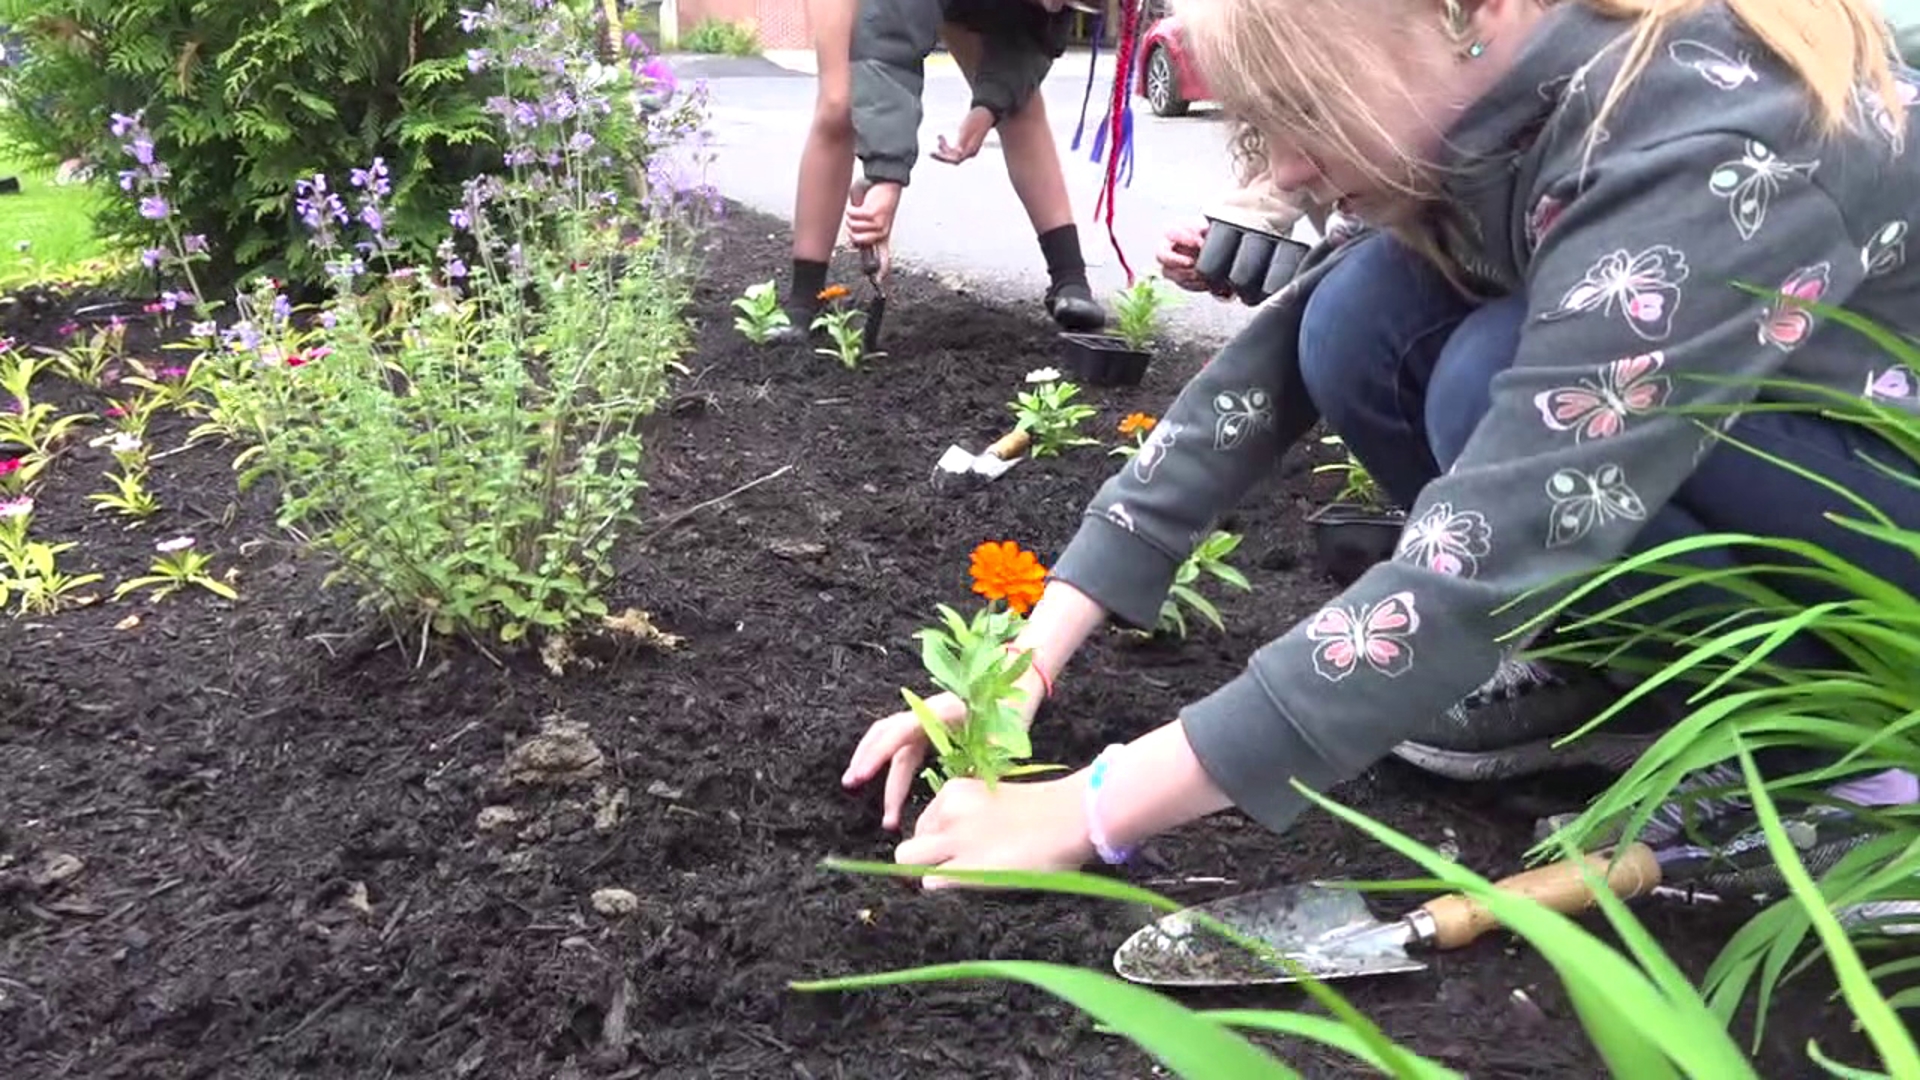 Kids from the Scranton School for Deaf and Hard of Hearing Children joined members of Scranton Tomorrow to help plant flowers in Christopher A. Doherty Park.